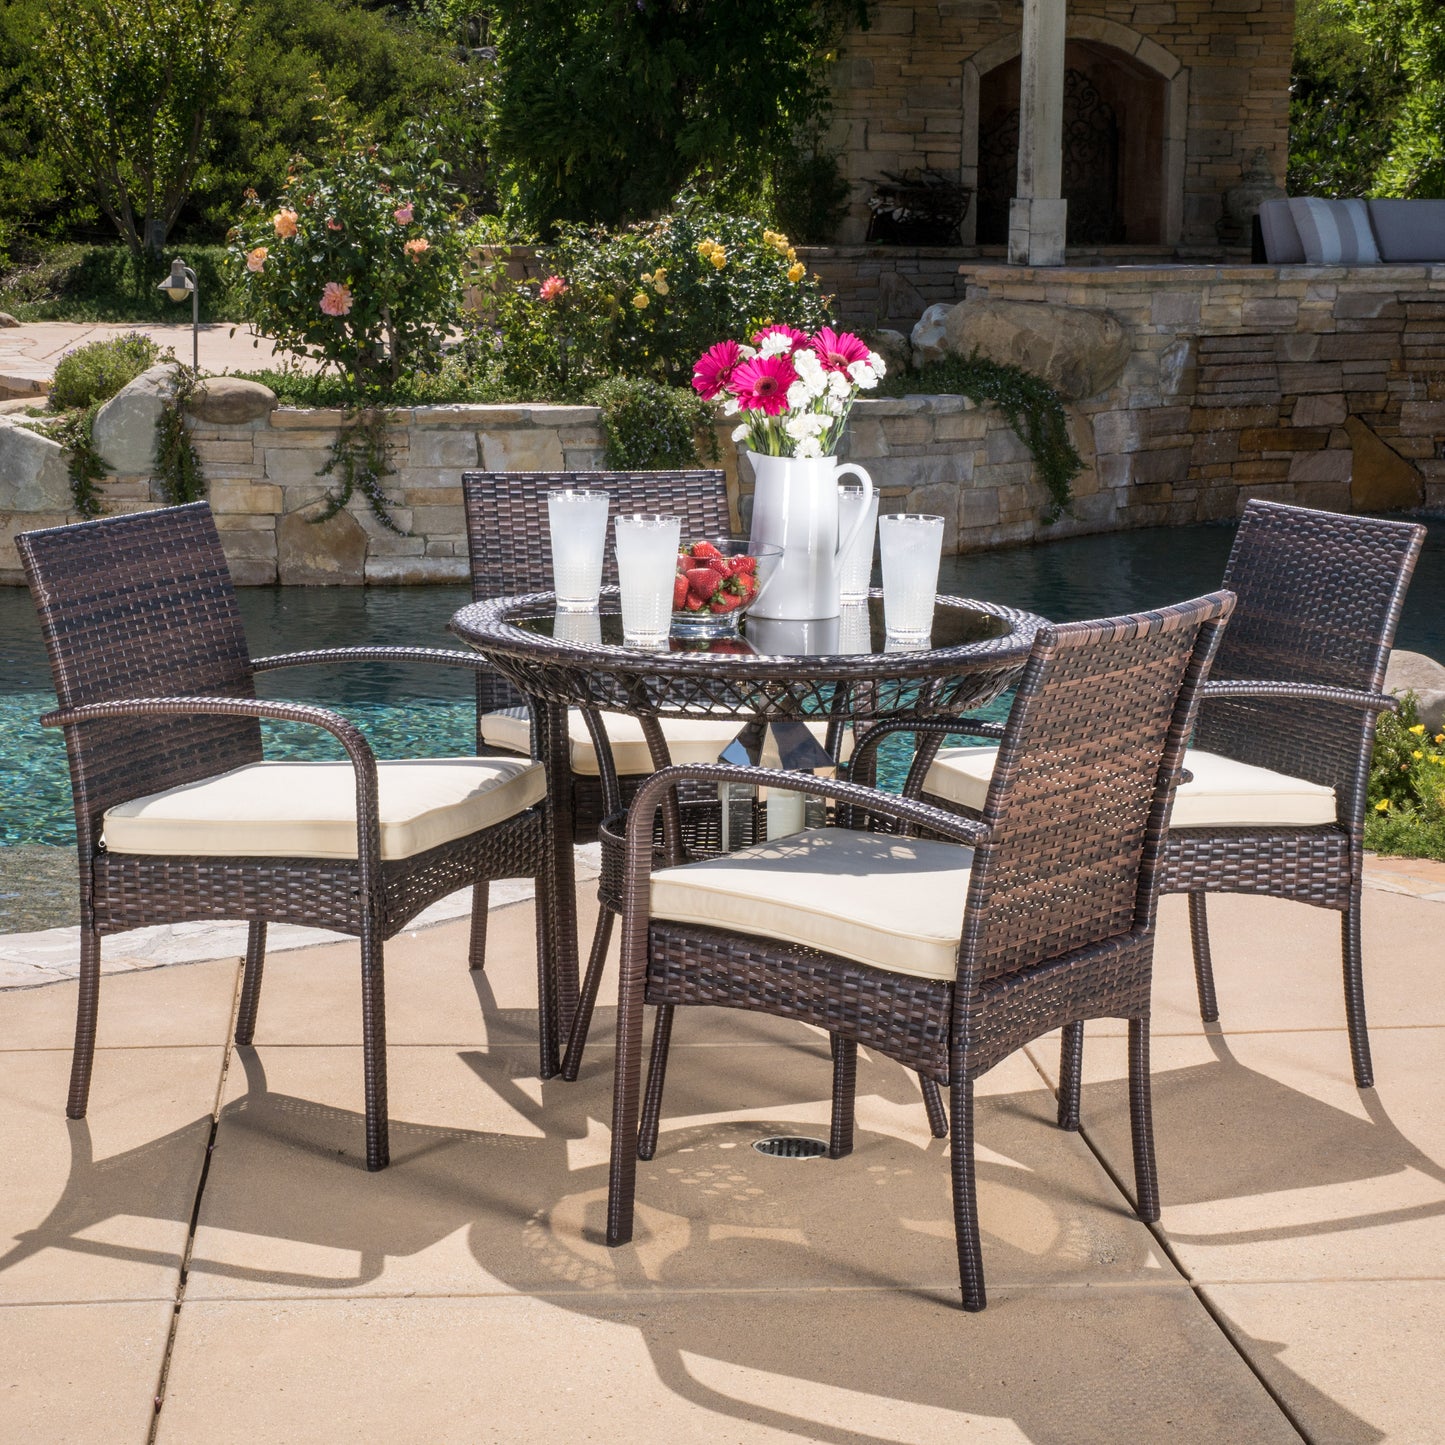 Blake Outdoor 5-piece Wicker Dining Set with Cushions